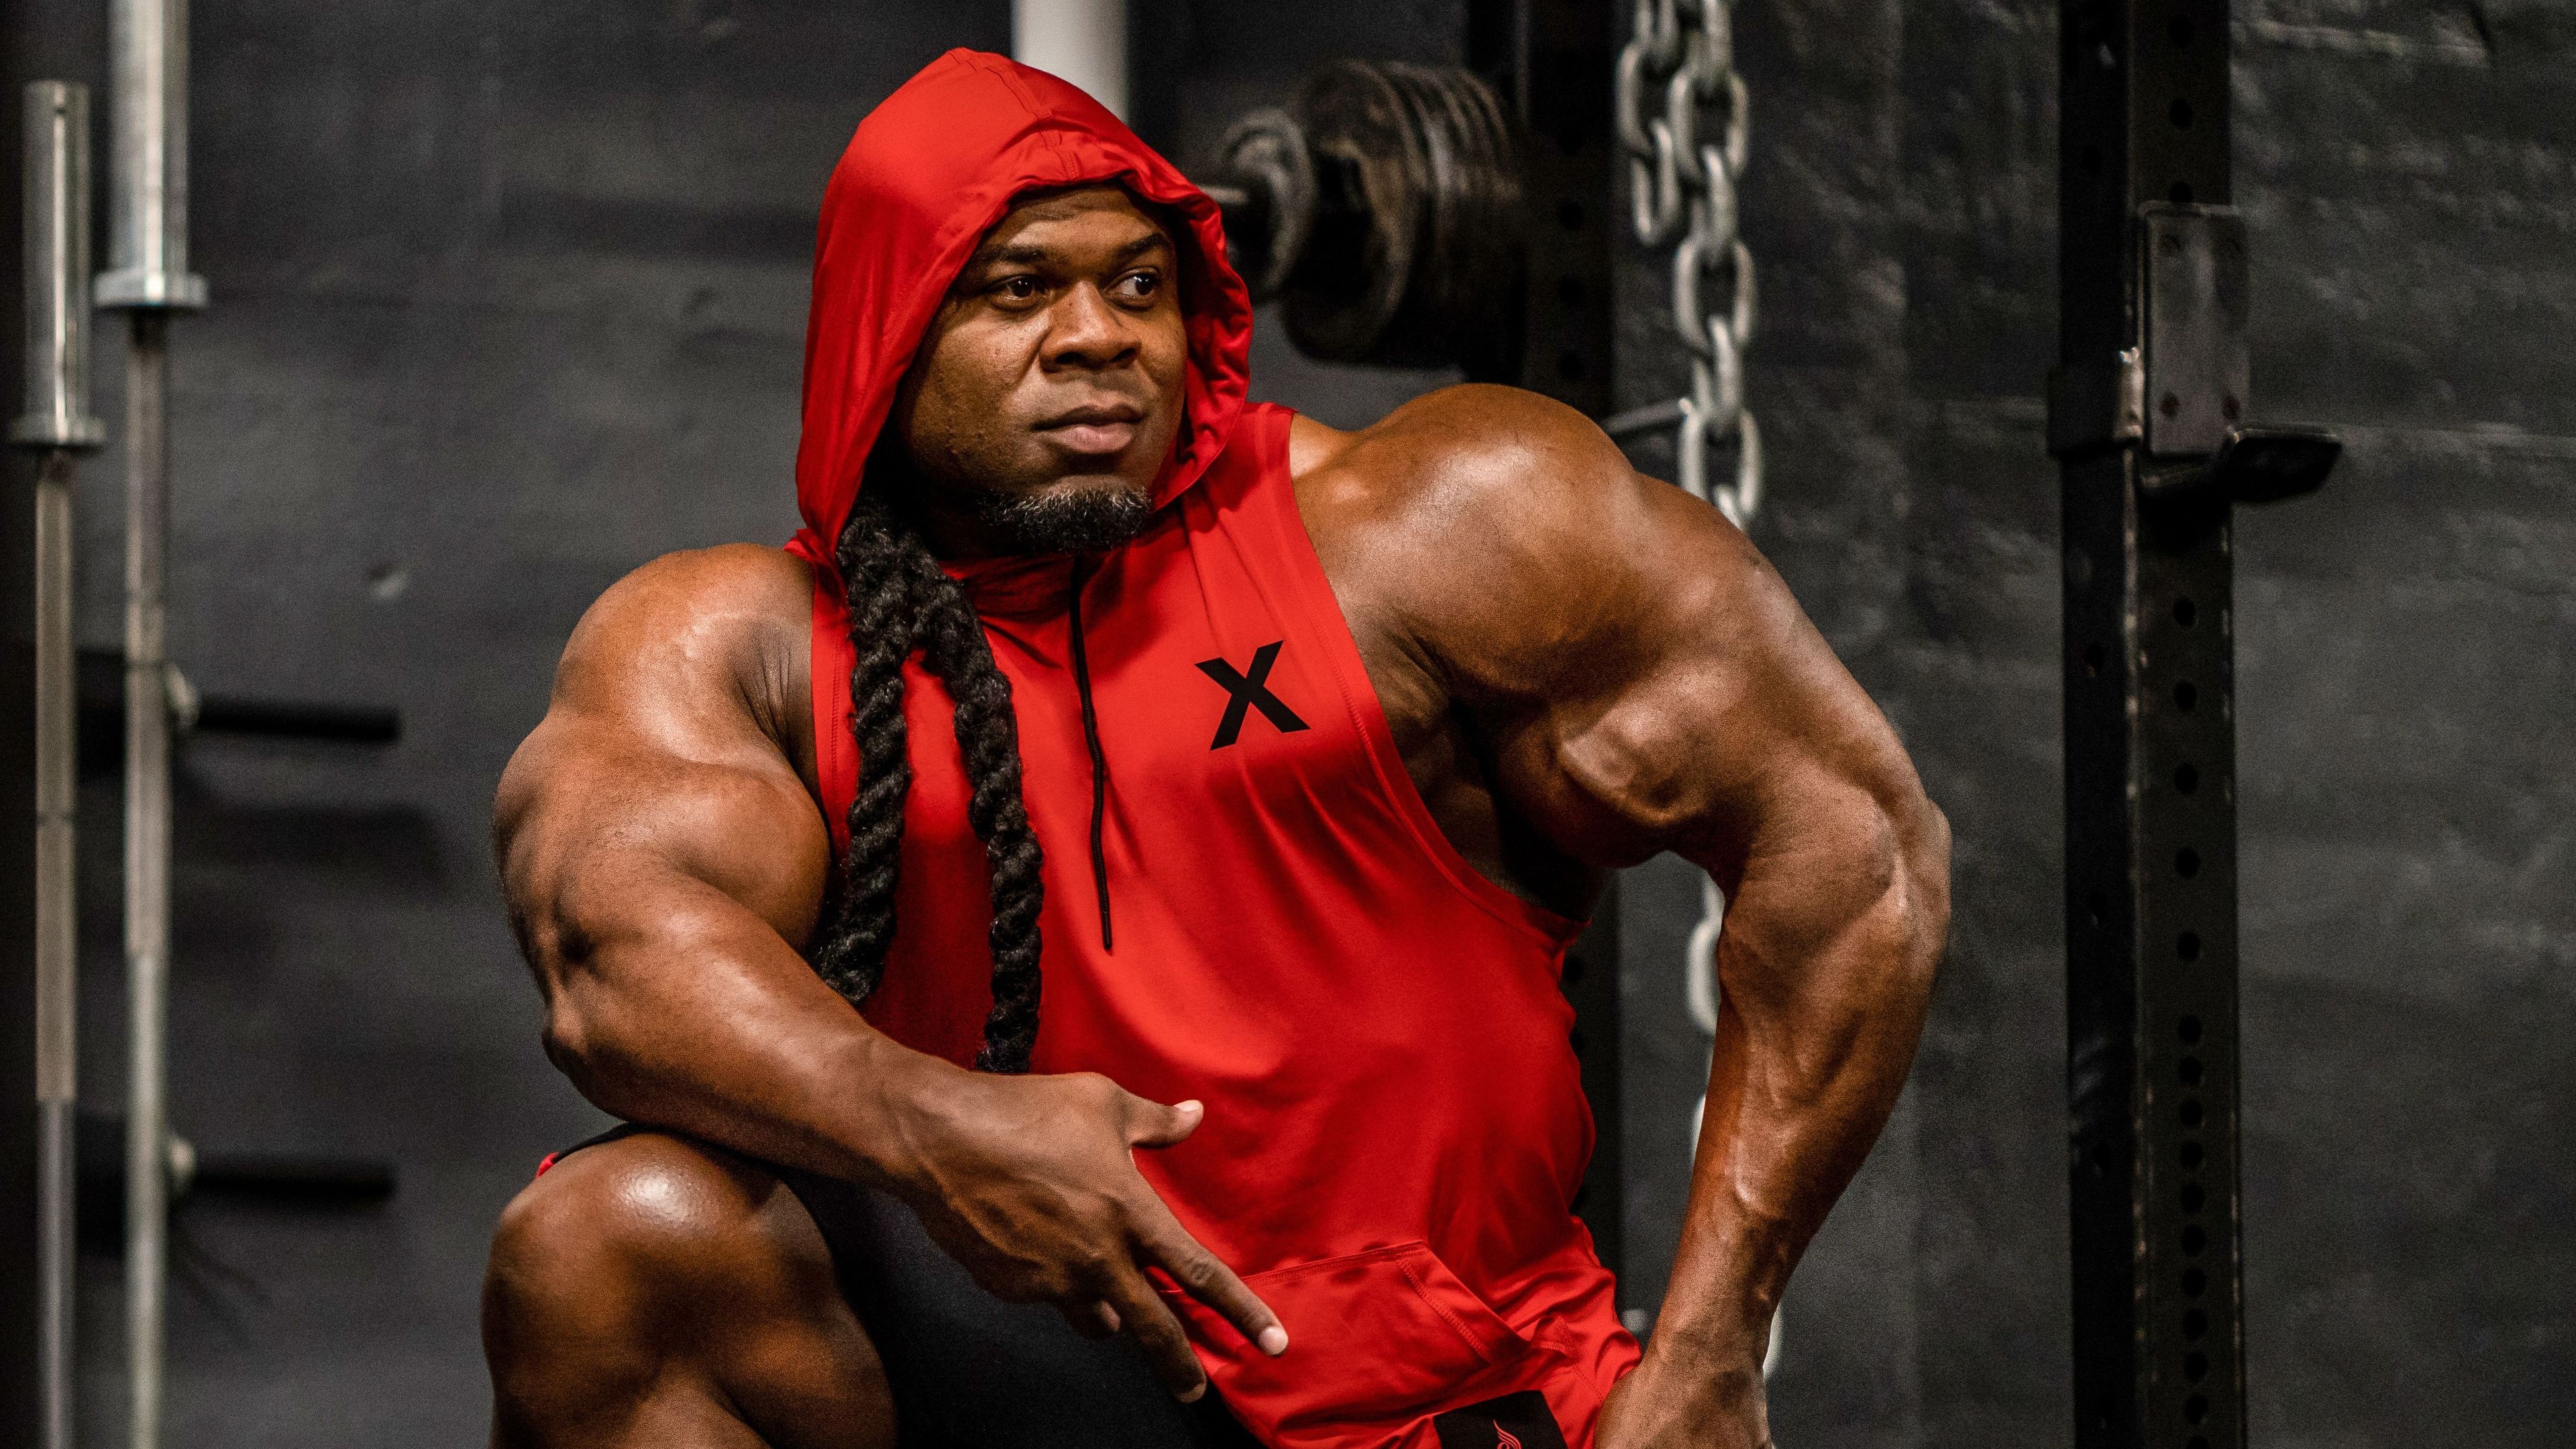 Bodybuilding: Kai Greene, Physical exercises, Lifting of weights, Culturism. 3840x2160 4K Background.